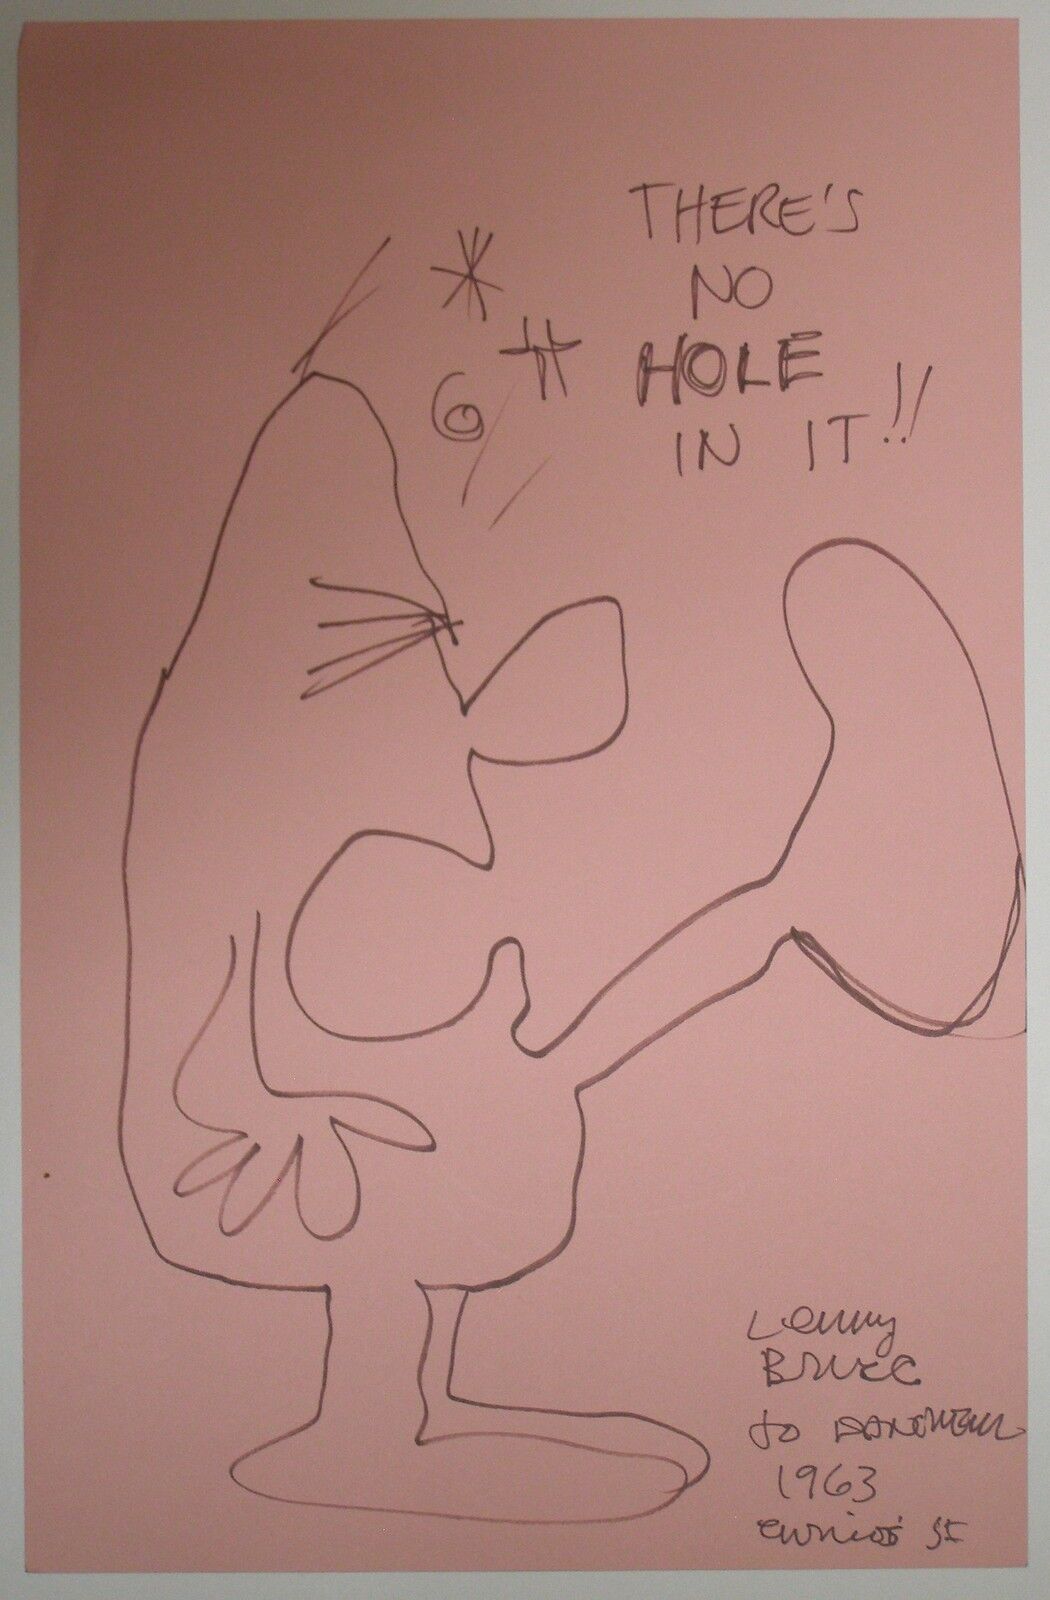 Original Odds Bodkins Dan O'Neill Drawing by LENNY BRUCE, signed, 1963